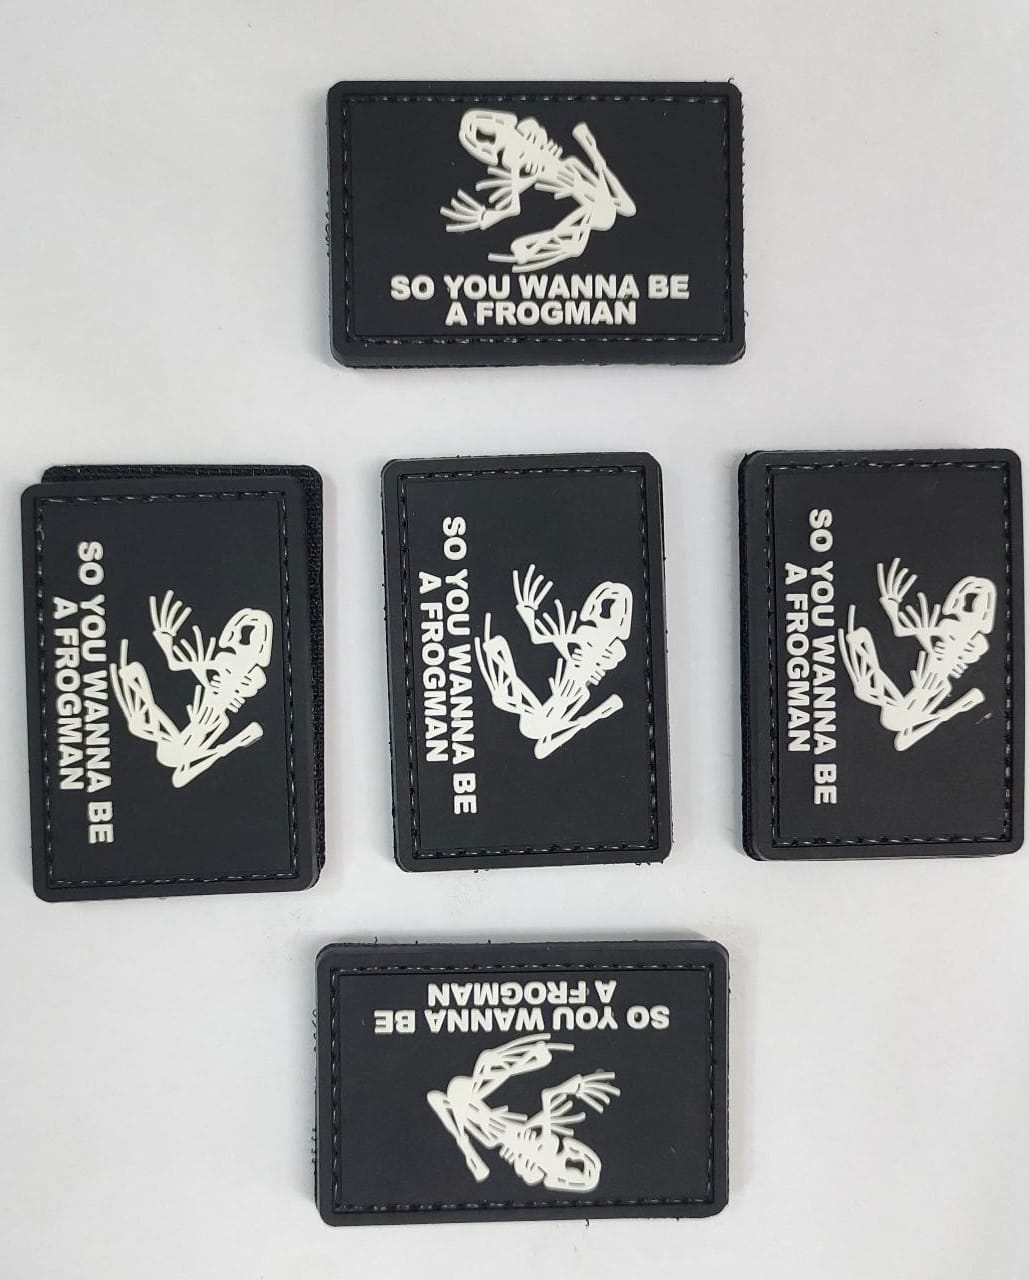 Missions - So You Wanna Be A Frog Man Patch